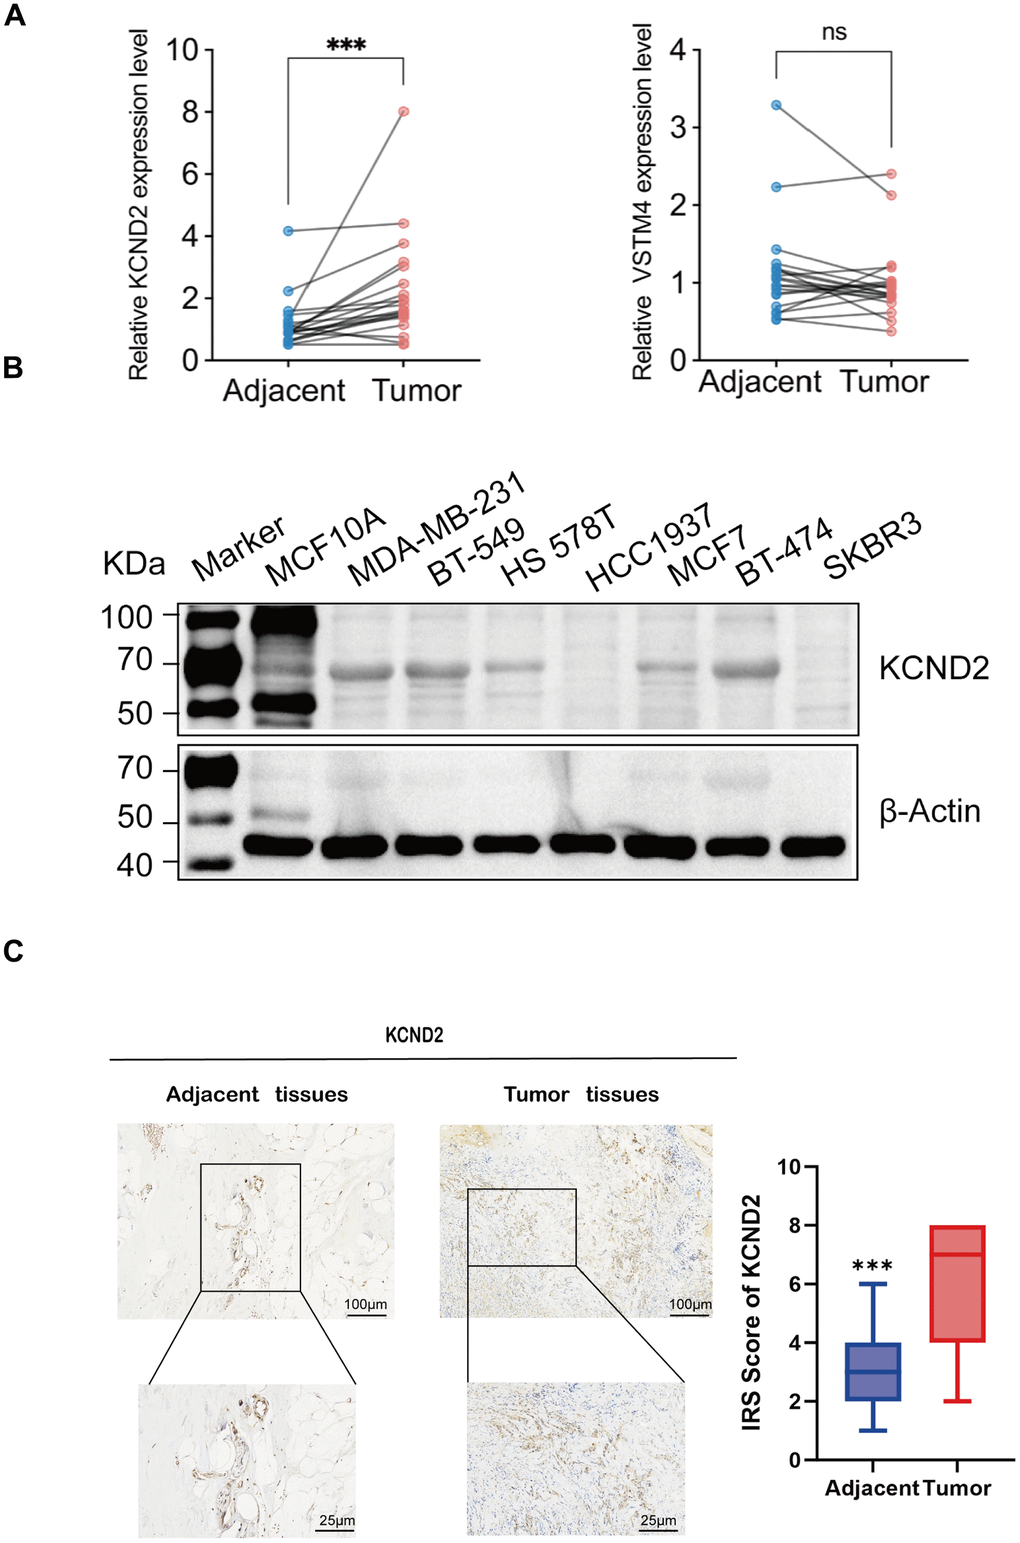 Validation of biomarkers. (A) The mRNA expression of KCND2 and VSTM4 in 20 pairs of tissues, including TNBC adjacent cancer and tumor tissues. (B) The protein expression of KCND2 was verified in cell lines. (C) The expression of KCND2 in the TNBC adjacent cancer and tumor tissues was verified by immunohistochemistry. NS, no significance; ***P 